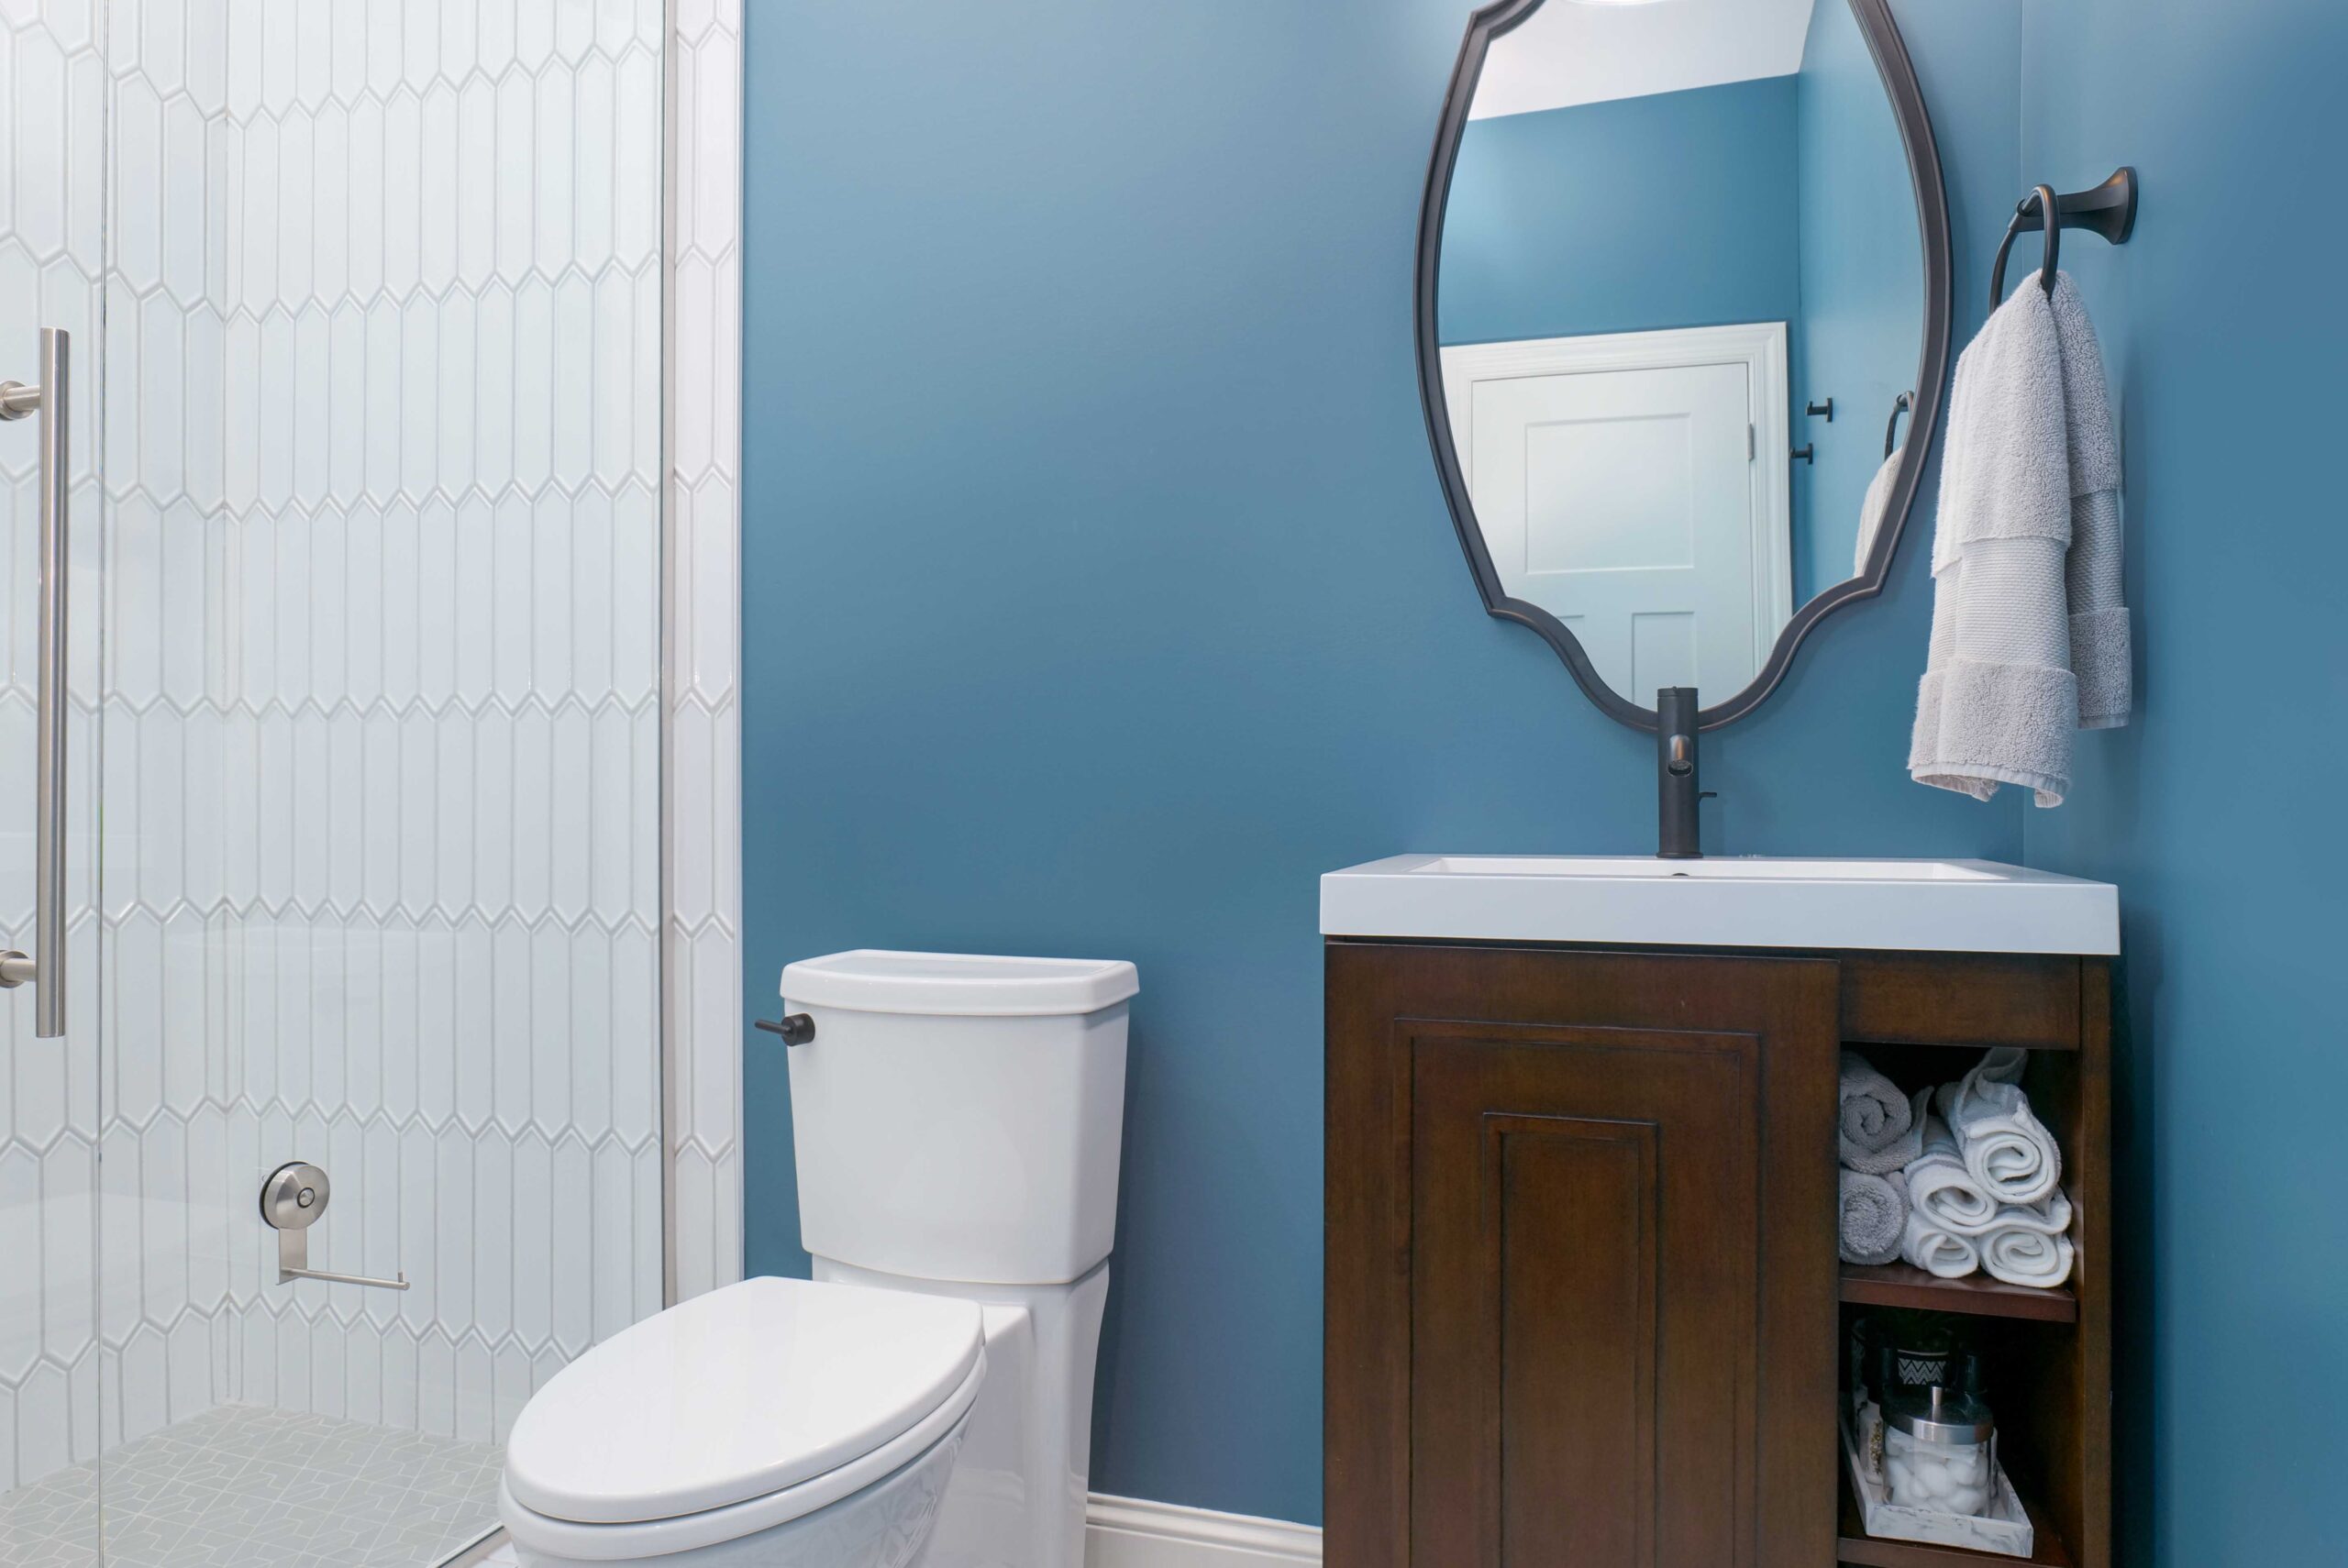 A bathroom with blue walls and a white toilet underwent an Orchard Lake remodel.